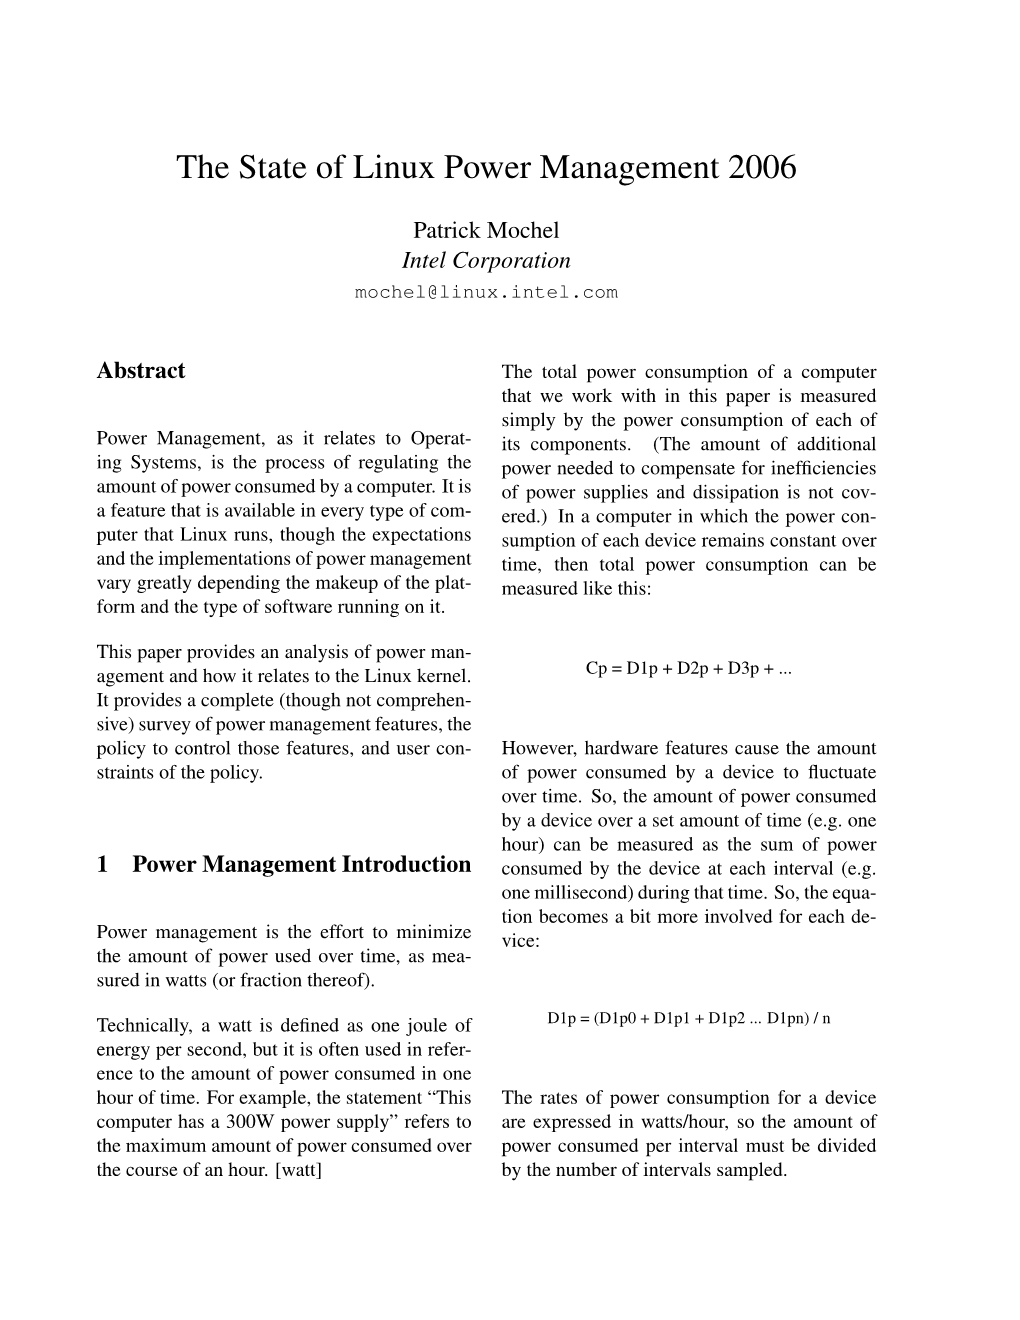 The State of Linux Power Management 2006